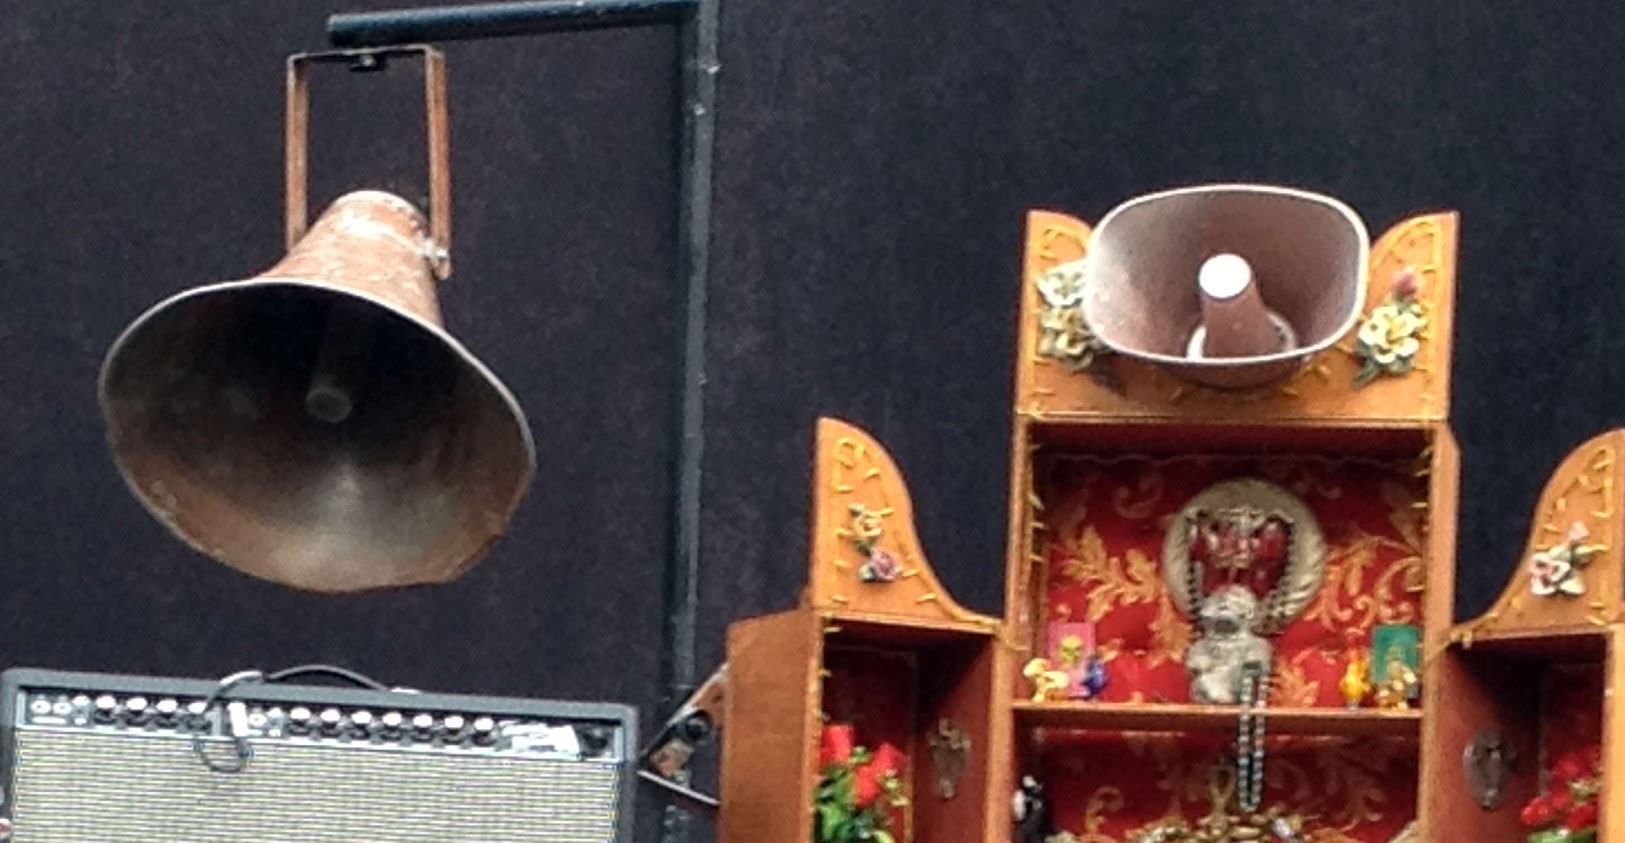 A decorative image showing two speaker cones